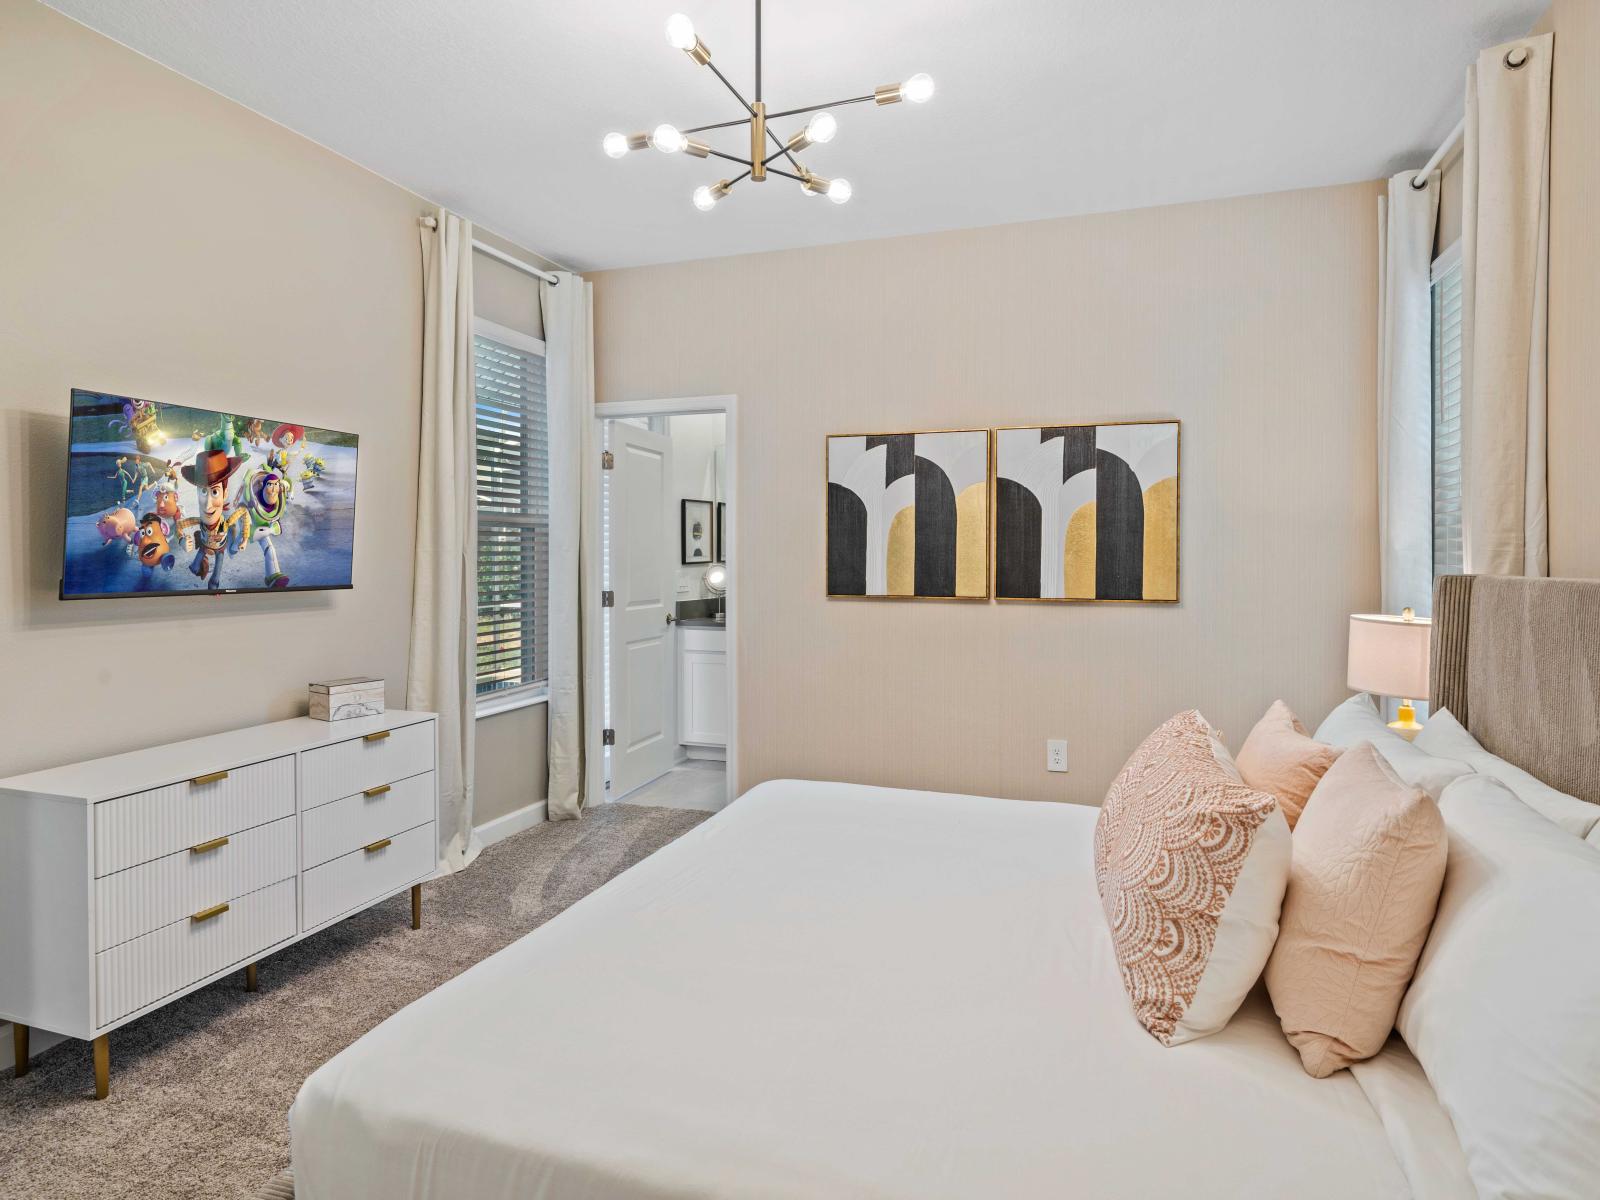 Lush Bedroom of the Home in Davenport Florida - Bright and airy bedroom with large windows for natural illumination - Thoughtfully designed bedroom featuring functional and stylish furniture - Comfy Bed, Smart TV and Netflix - Attached Bathroom